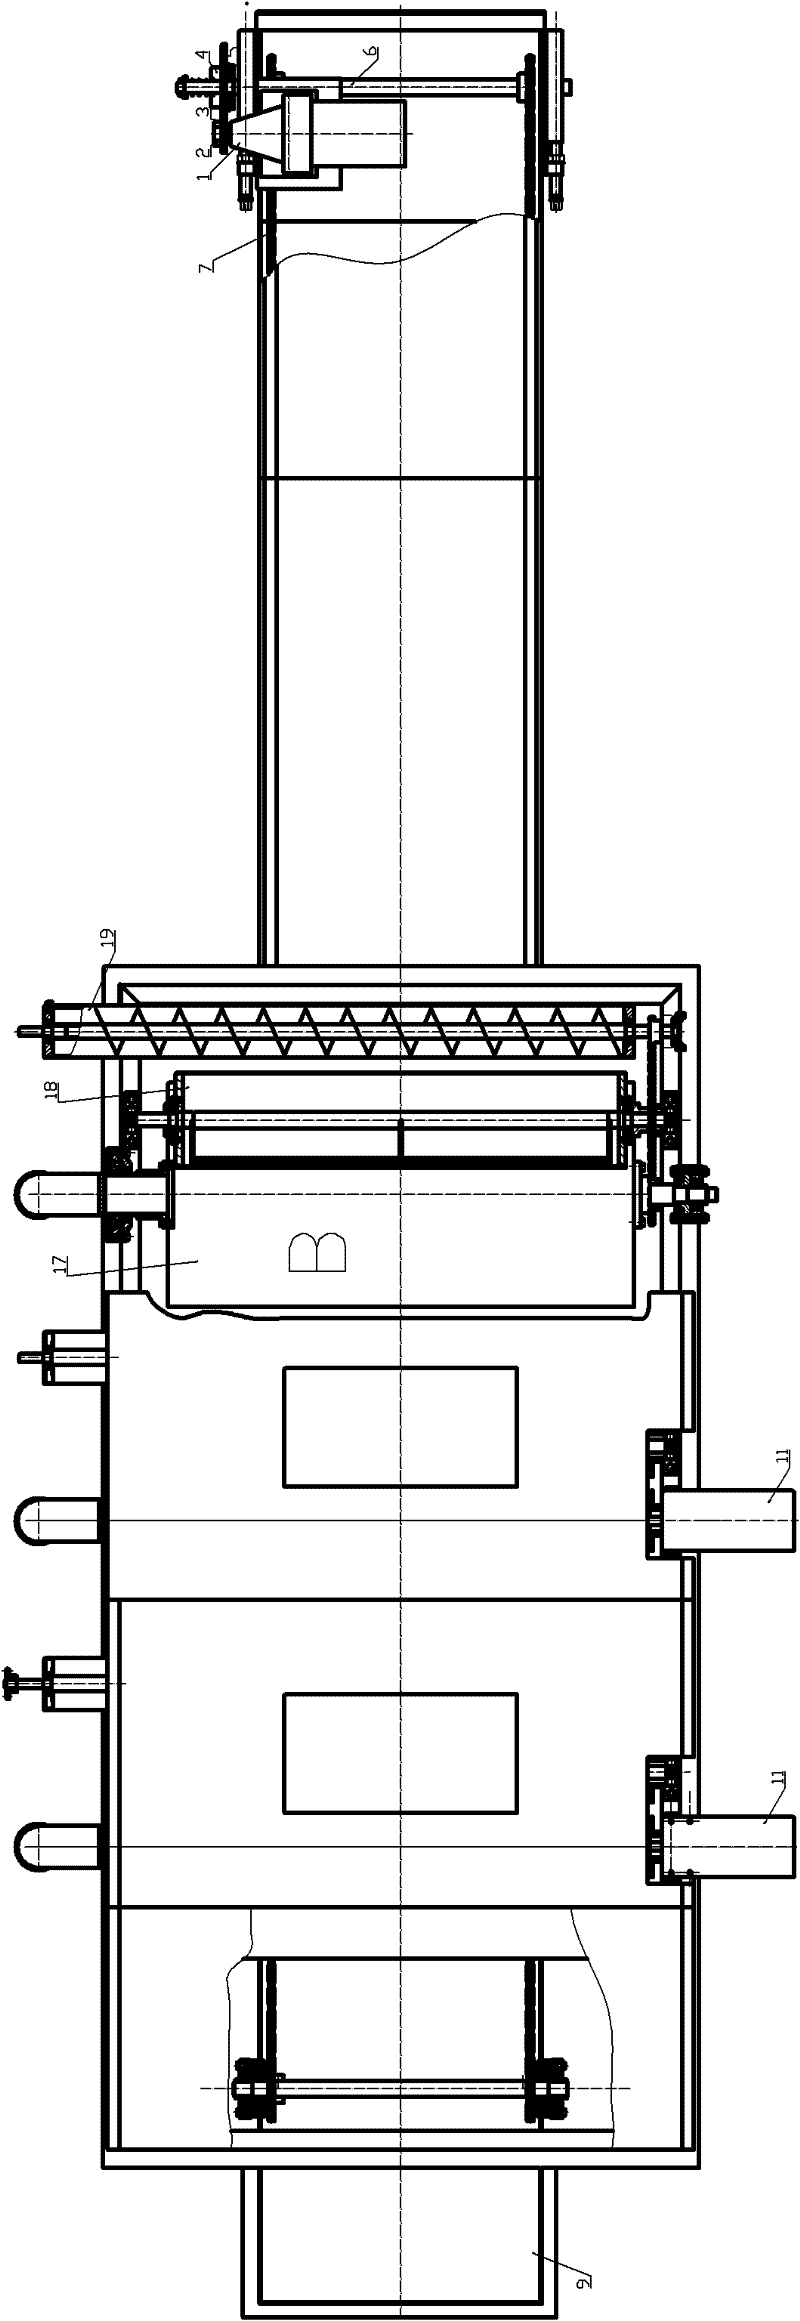 An industrial coolant purification device